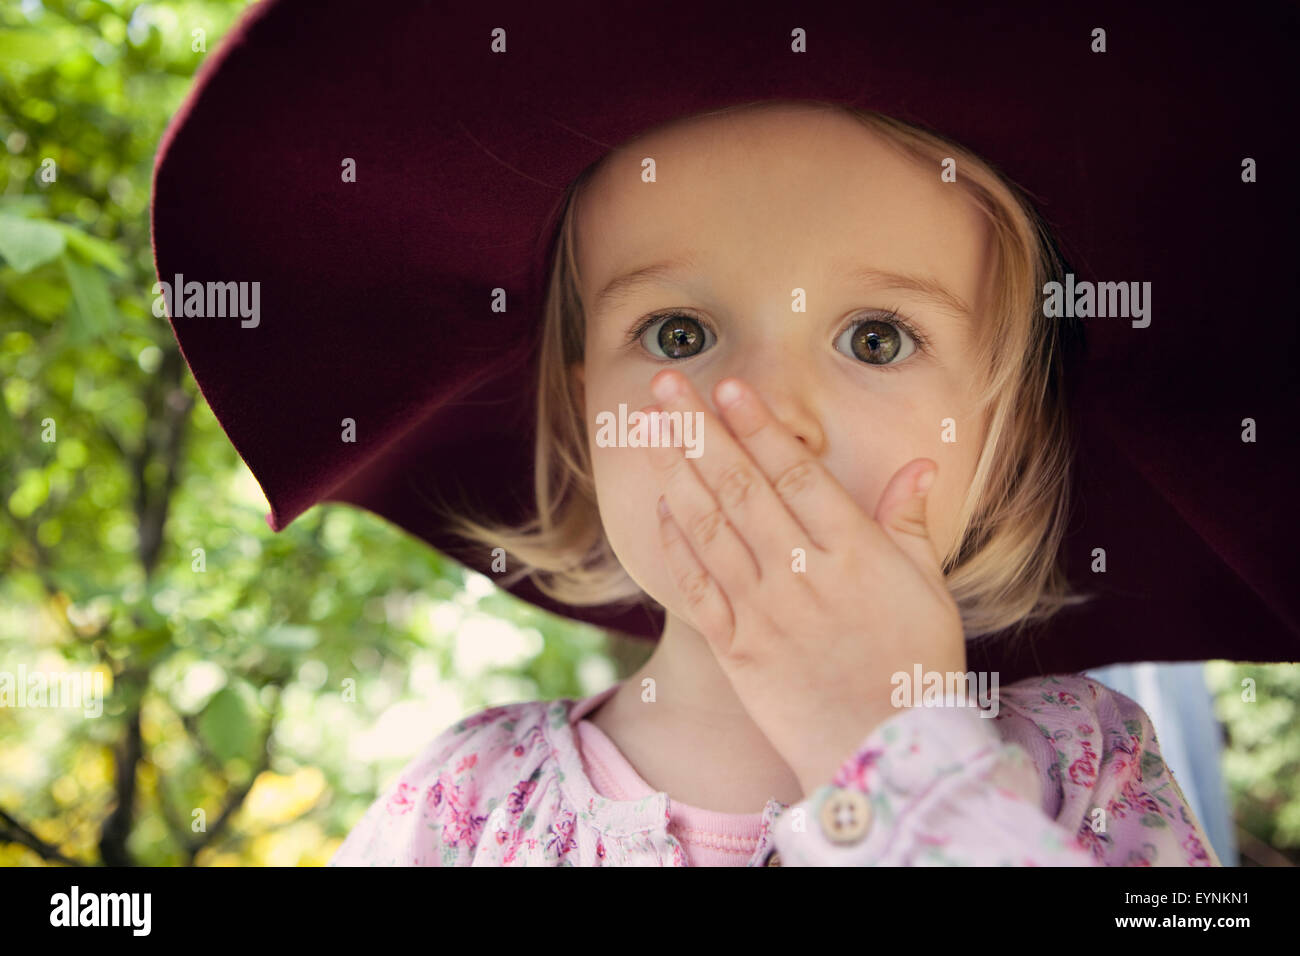 Toddler with hand over mouth in astonishment Stock Photo